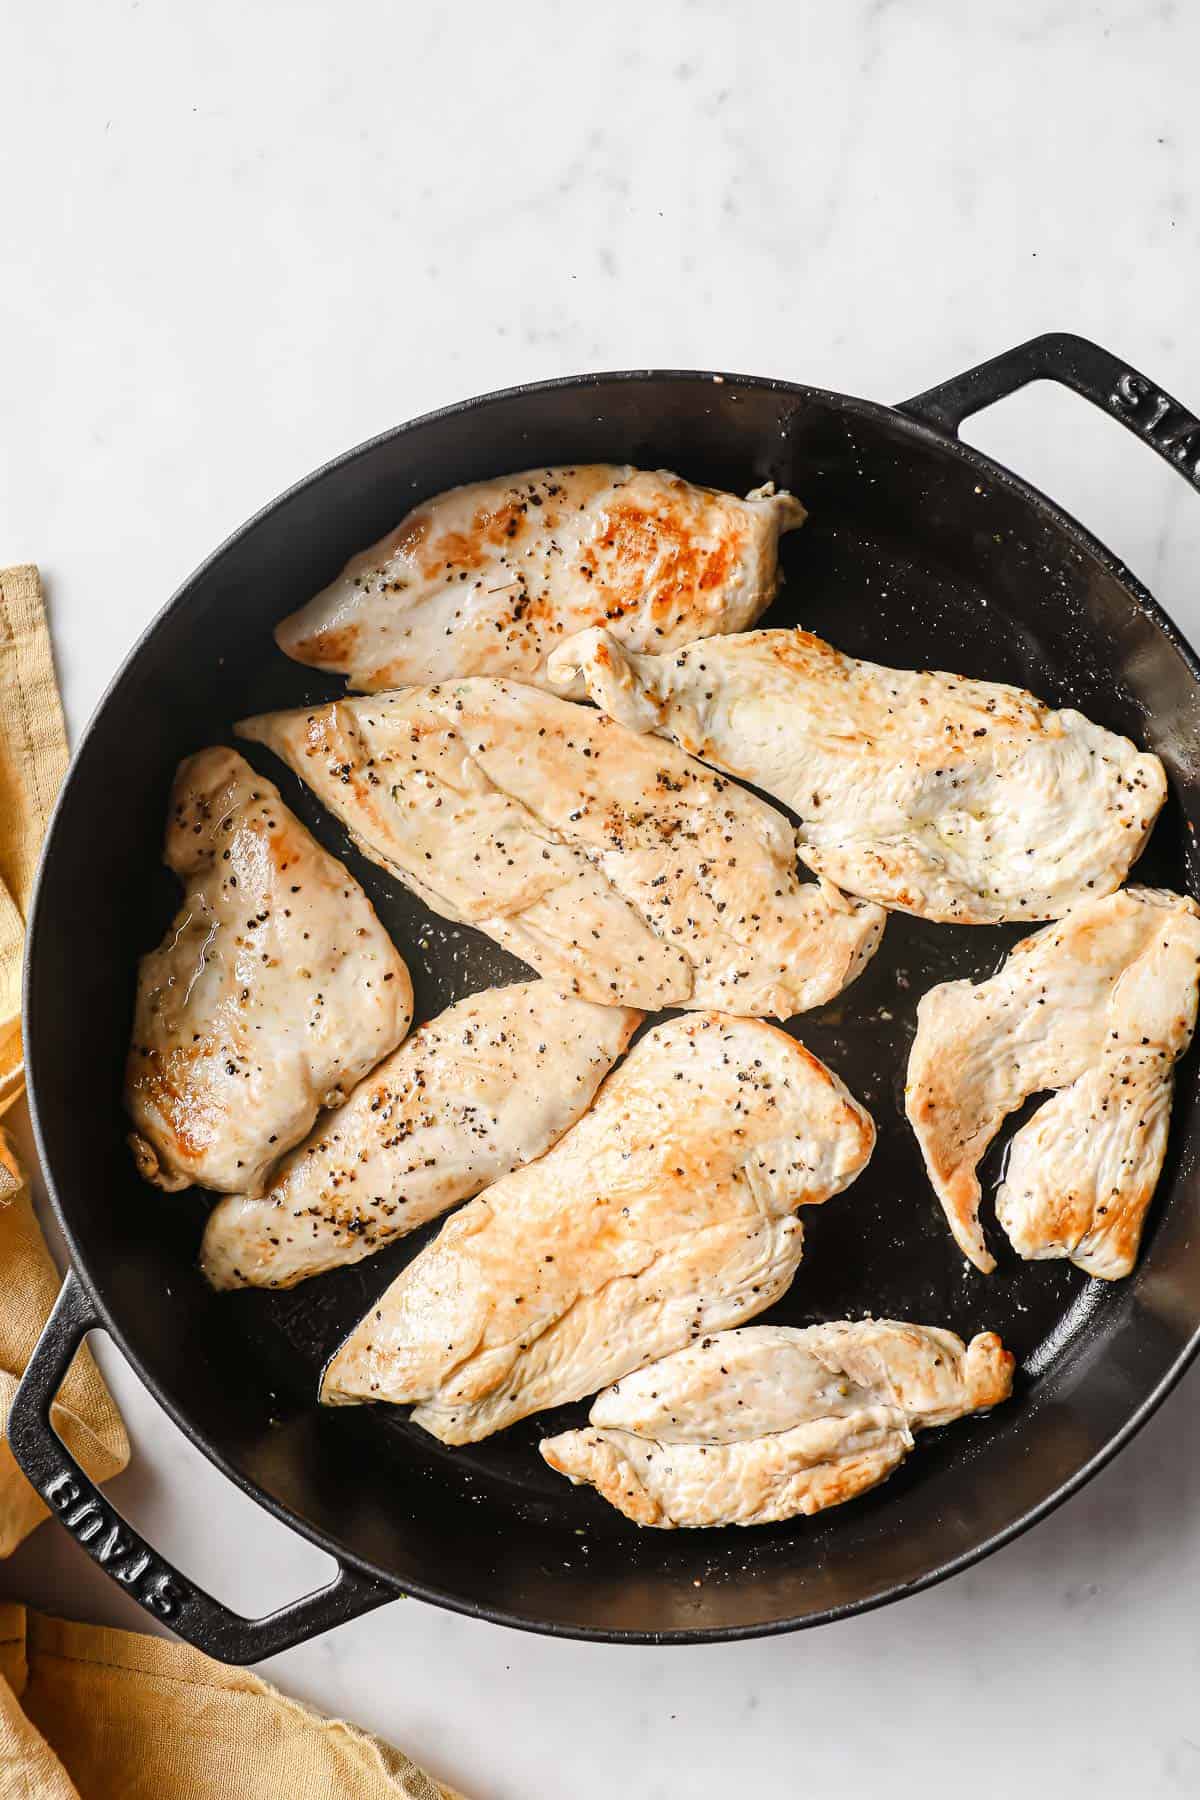 pan-seared chicken breasts, seasoned with salt and pepper, in a cast iron skillet